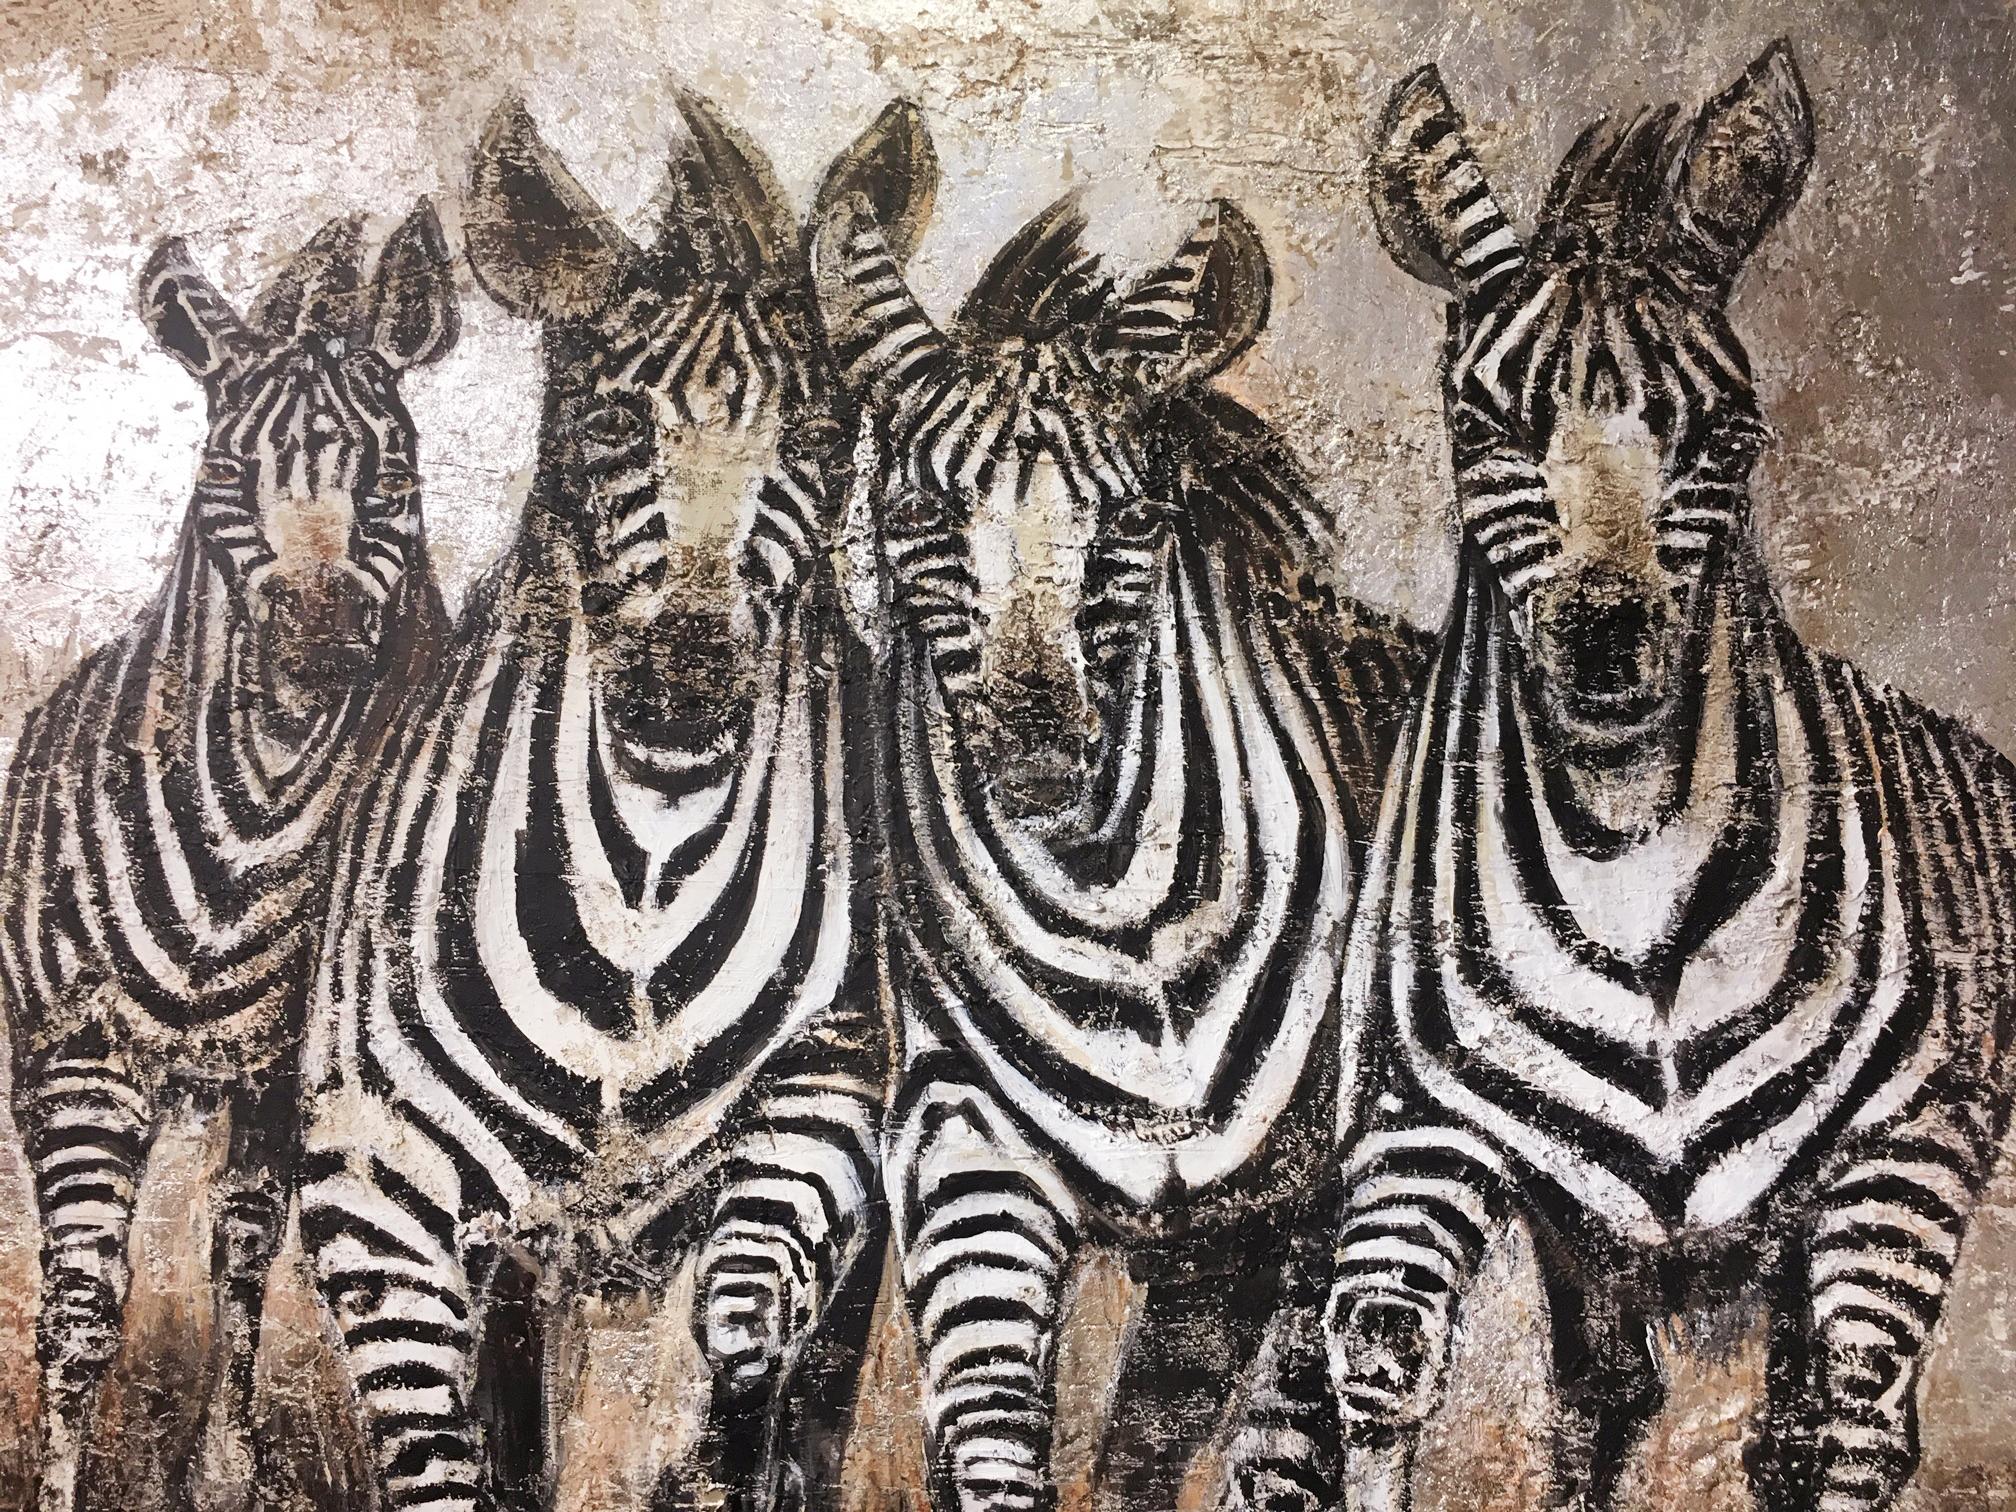 Hand-Crafted Zebras Painting For Sale